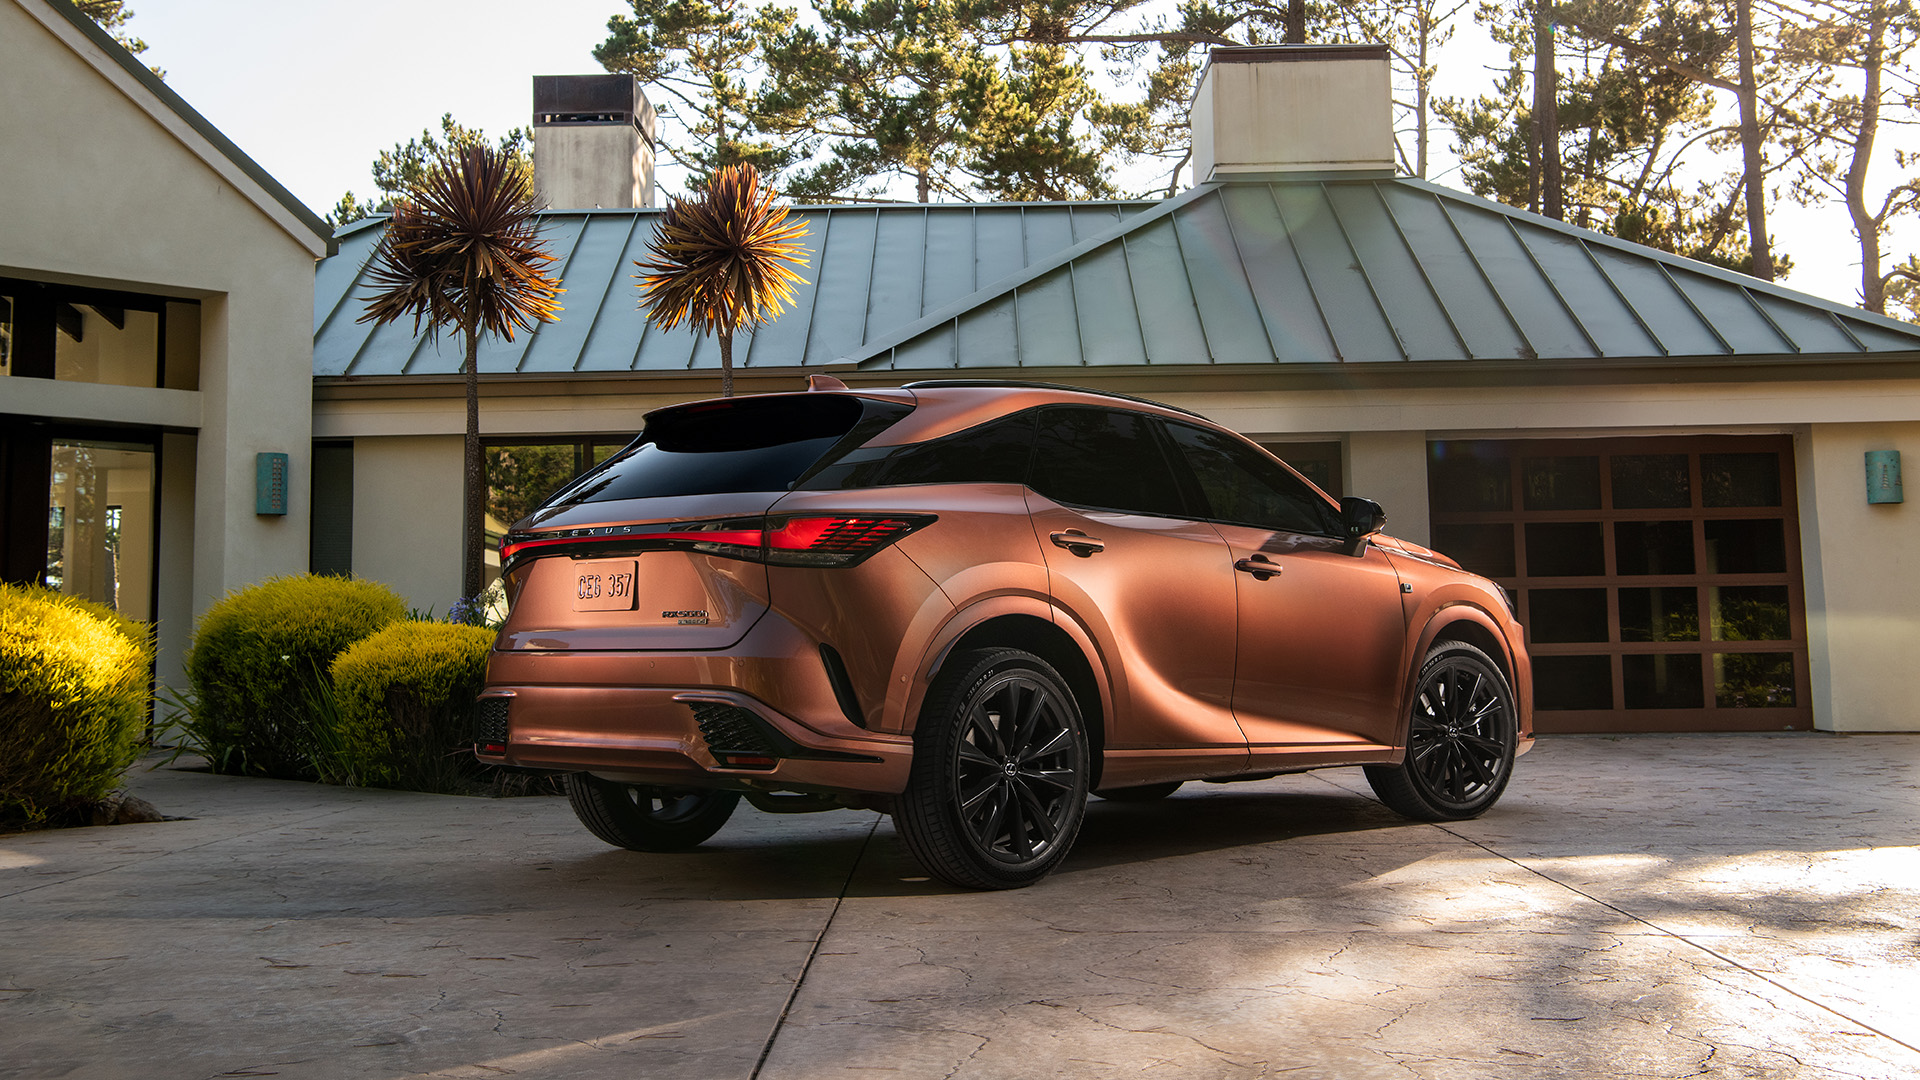 A copper coloured RX is parked in front of a luxury home. 